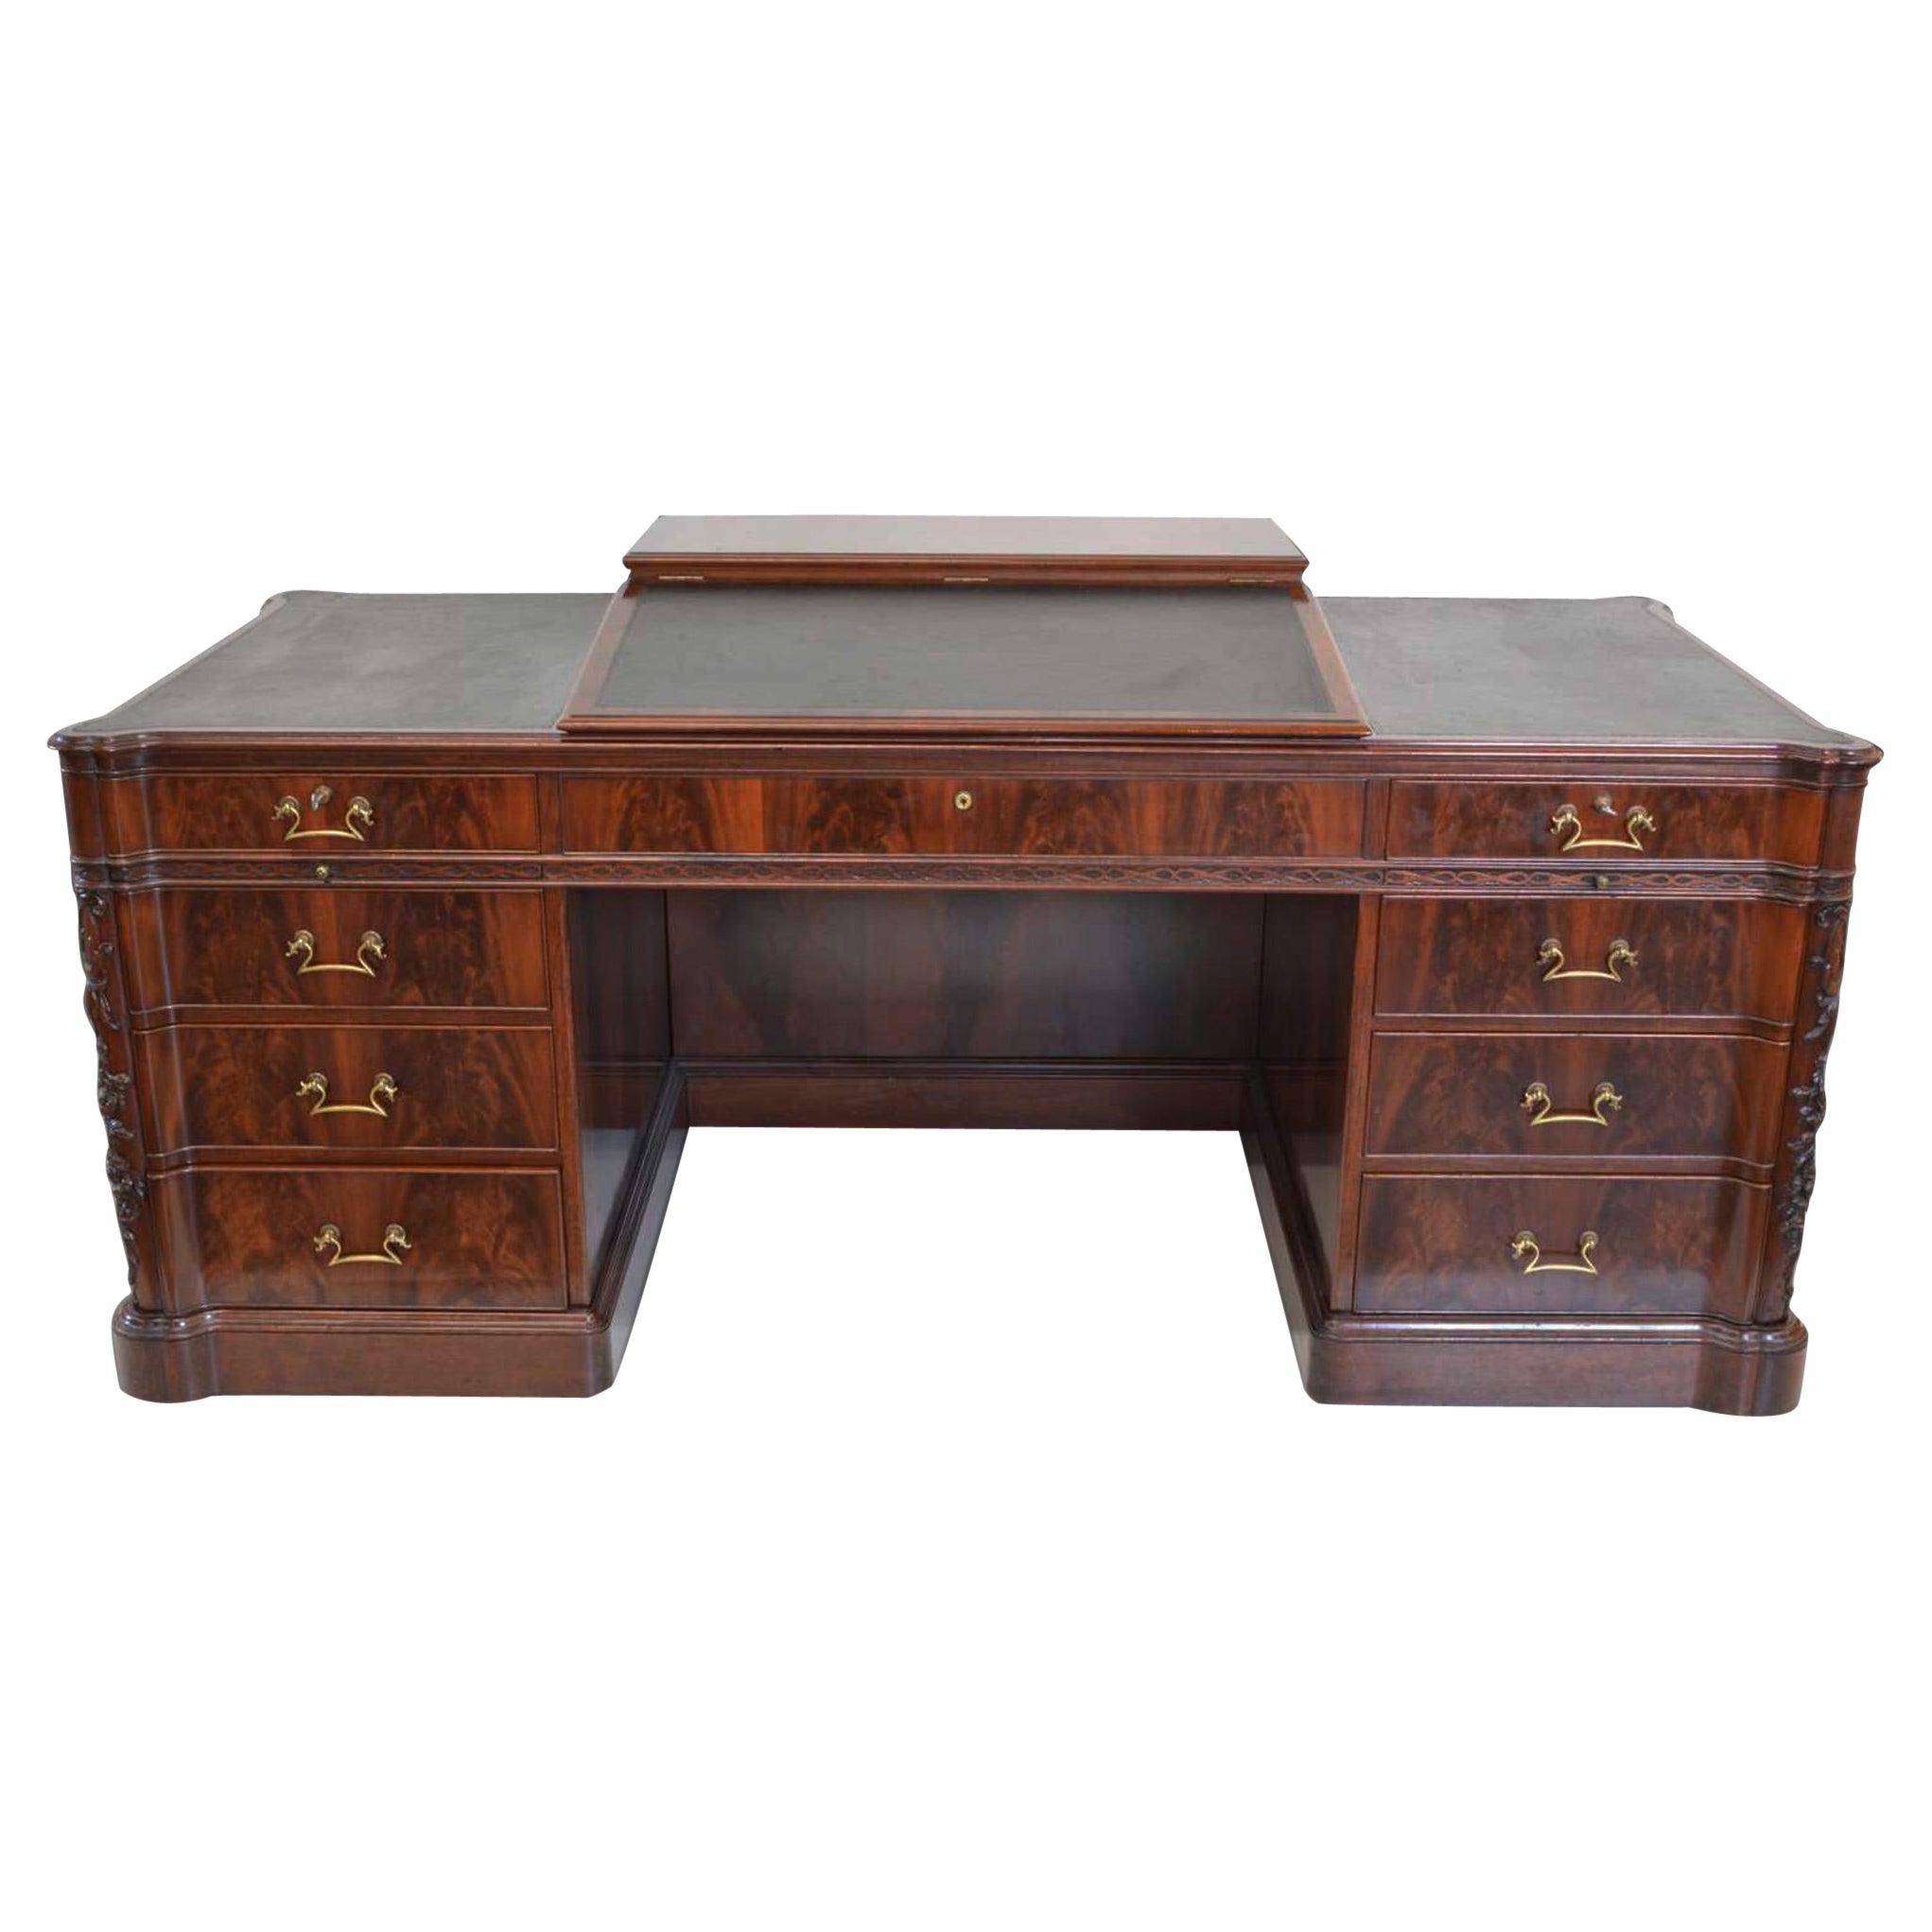 Gillows - Mid 19thC Mahogany Twin Pedestal Desk For Sale